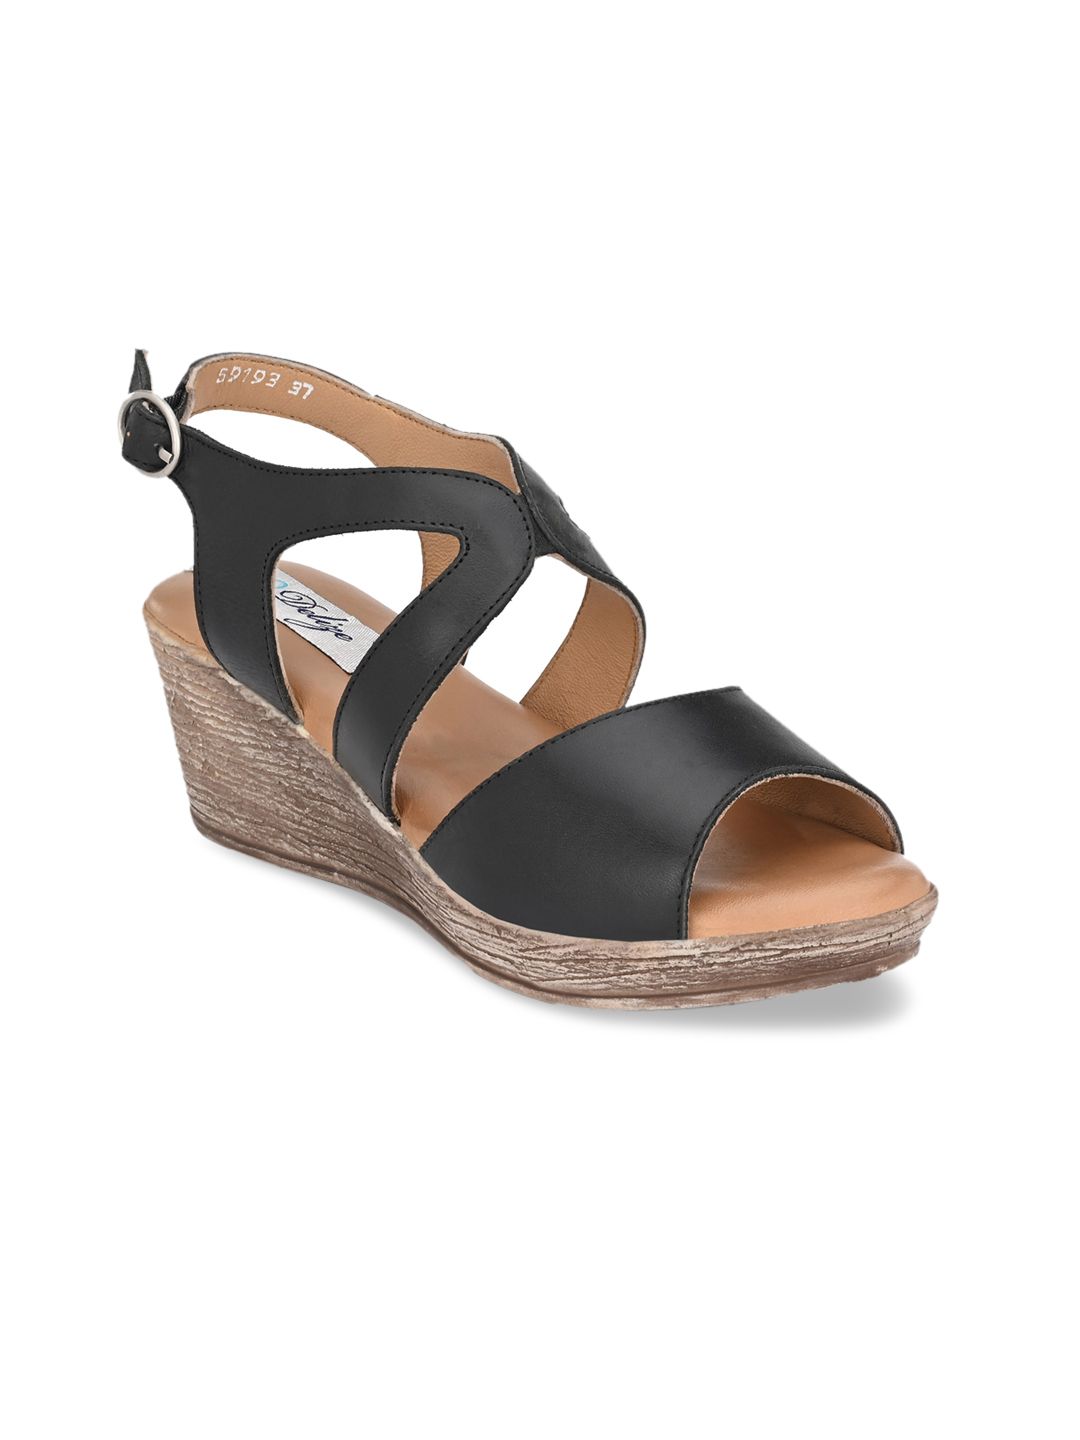 Delize Black Lightweight Leather Peep Toe Wedge Sandals With Buckles Price in India